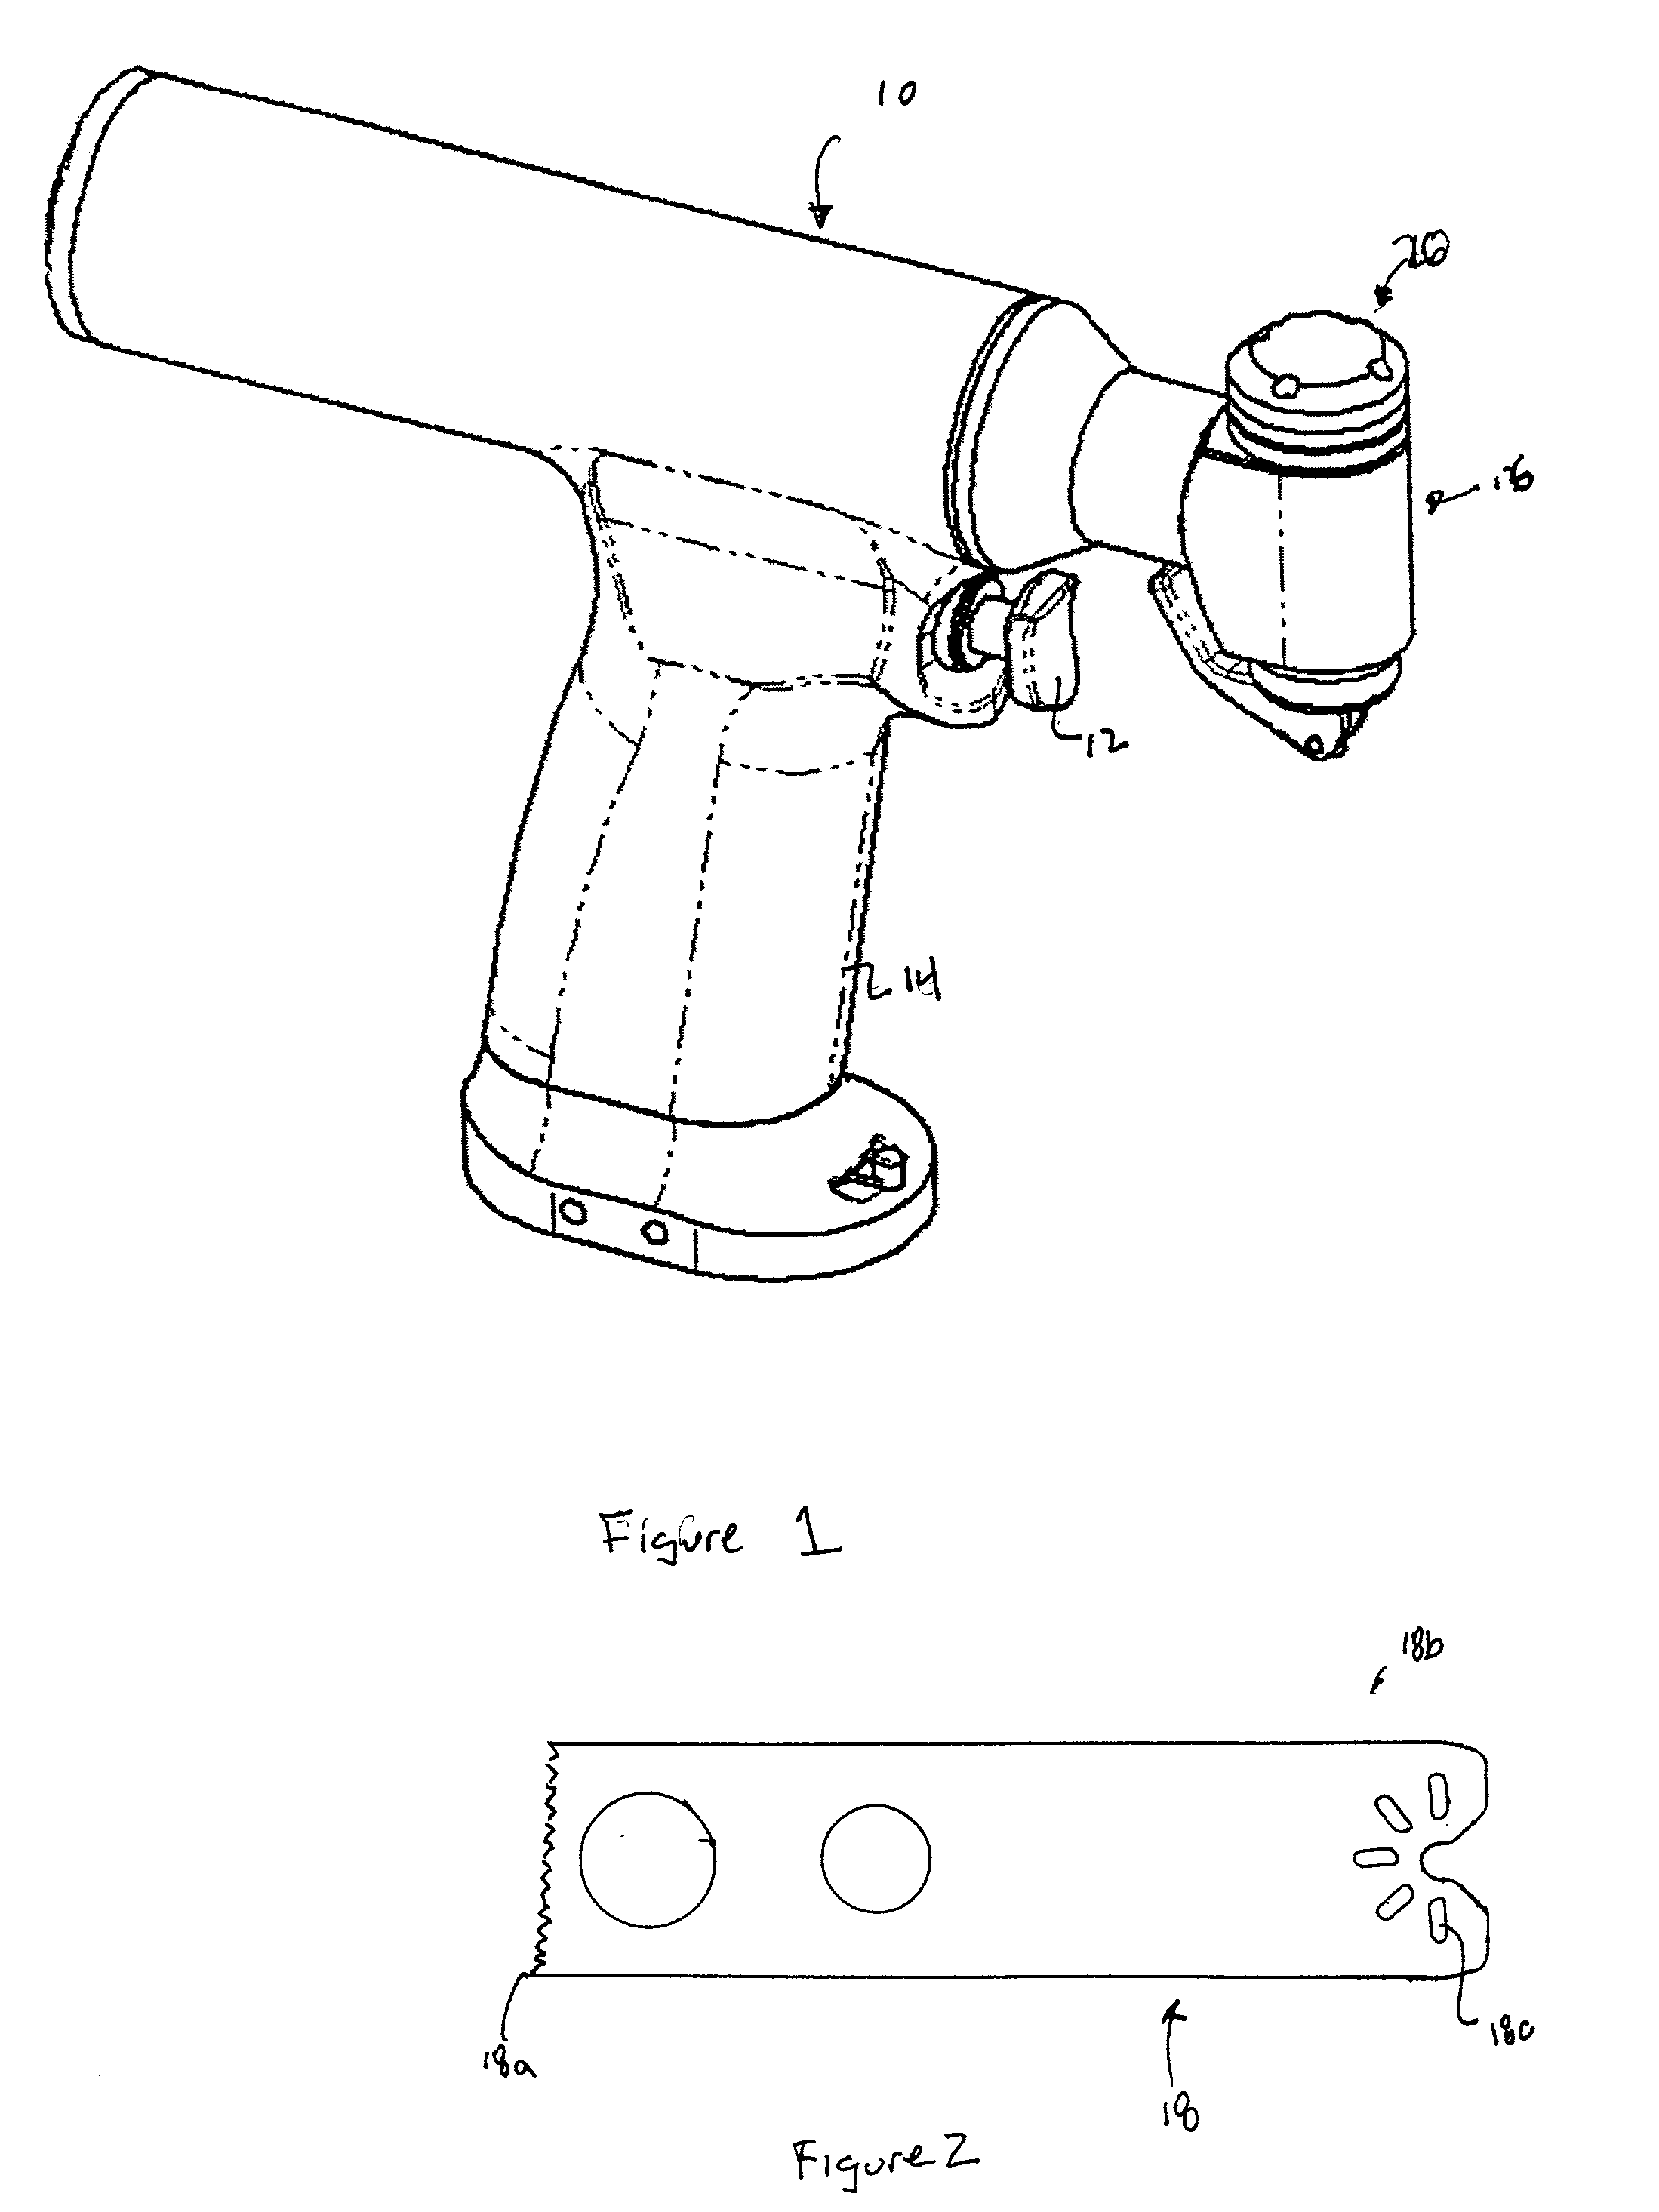 Connector assembly for a surgical tool